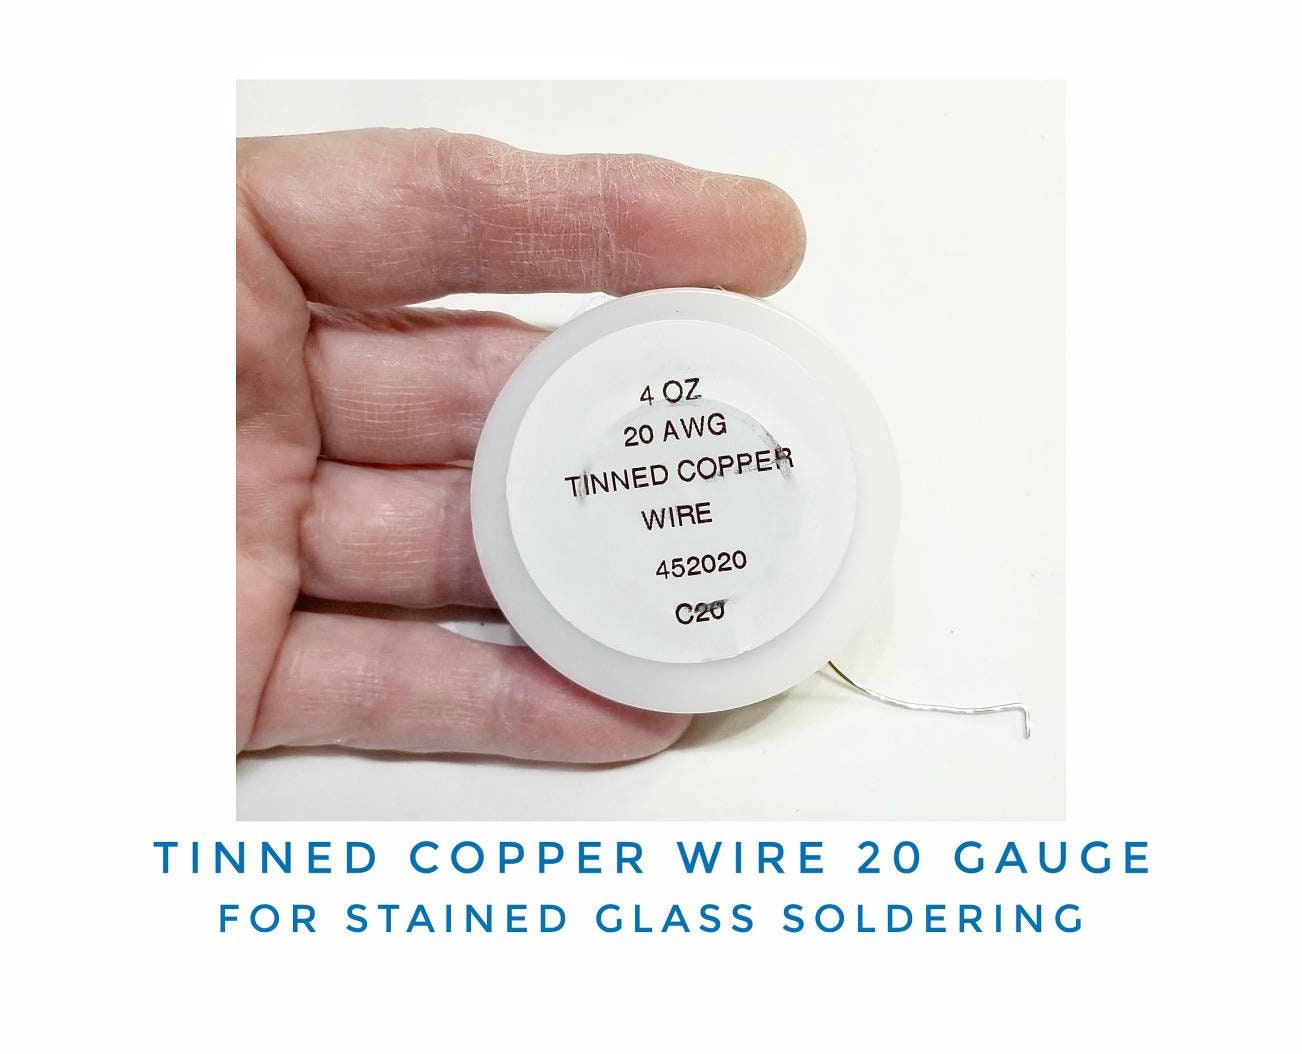 Wire, Tinned Copper, 20 Gauge. Easy to solder, uncoated for Stained Glass Projects with embellishments. Silver color, Wire Wrapping Jewelry.